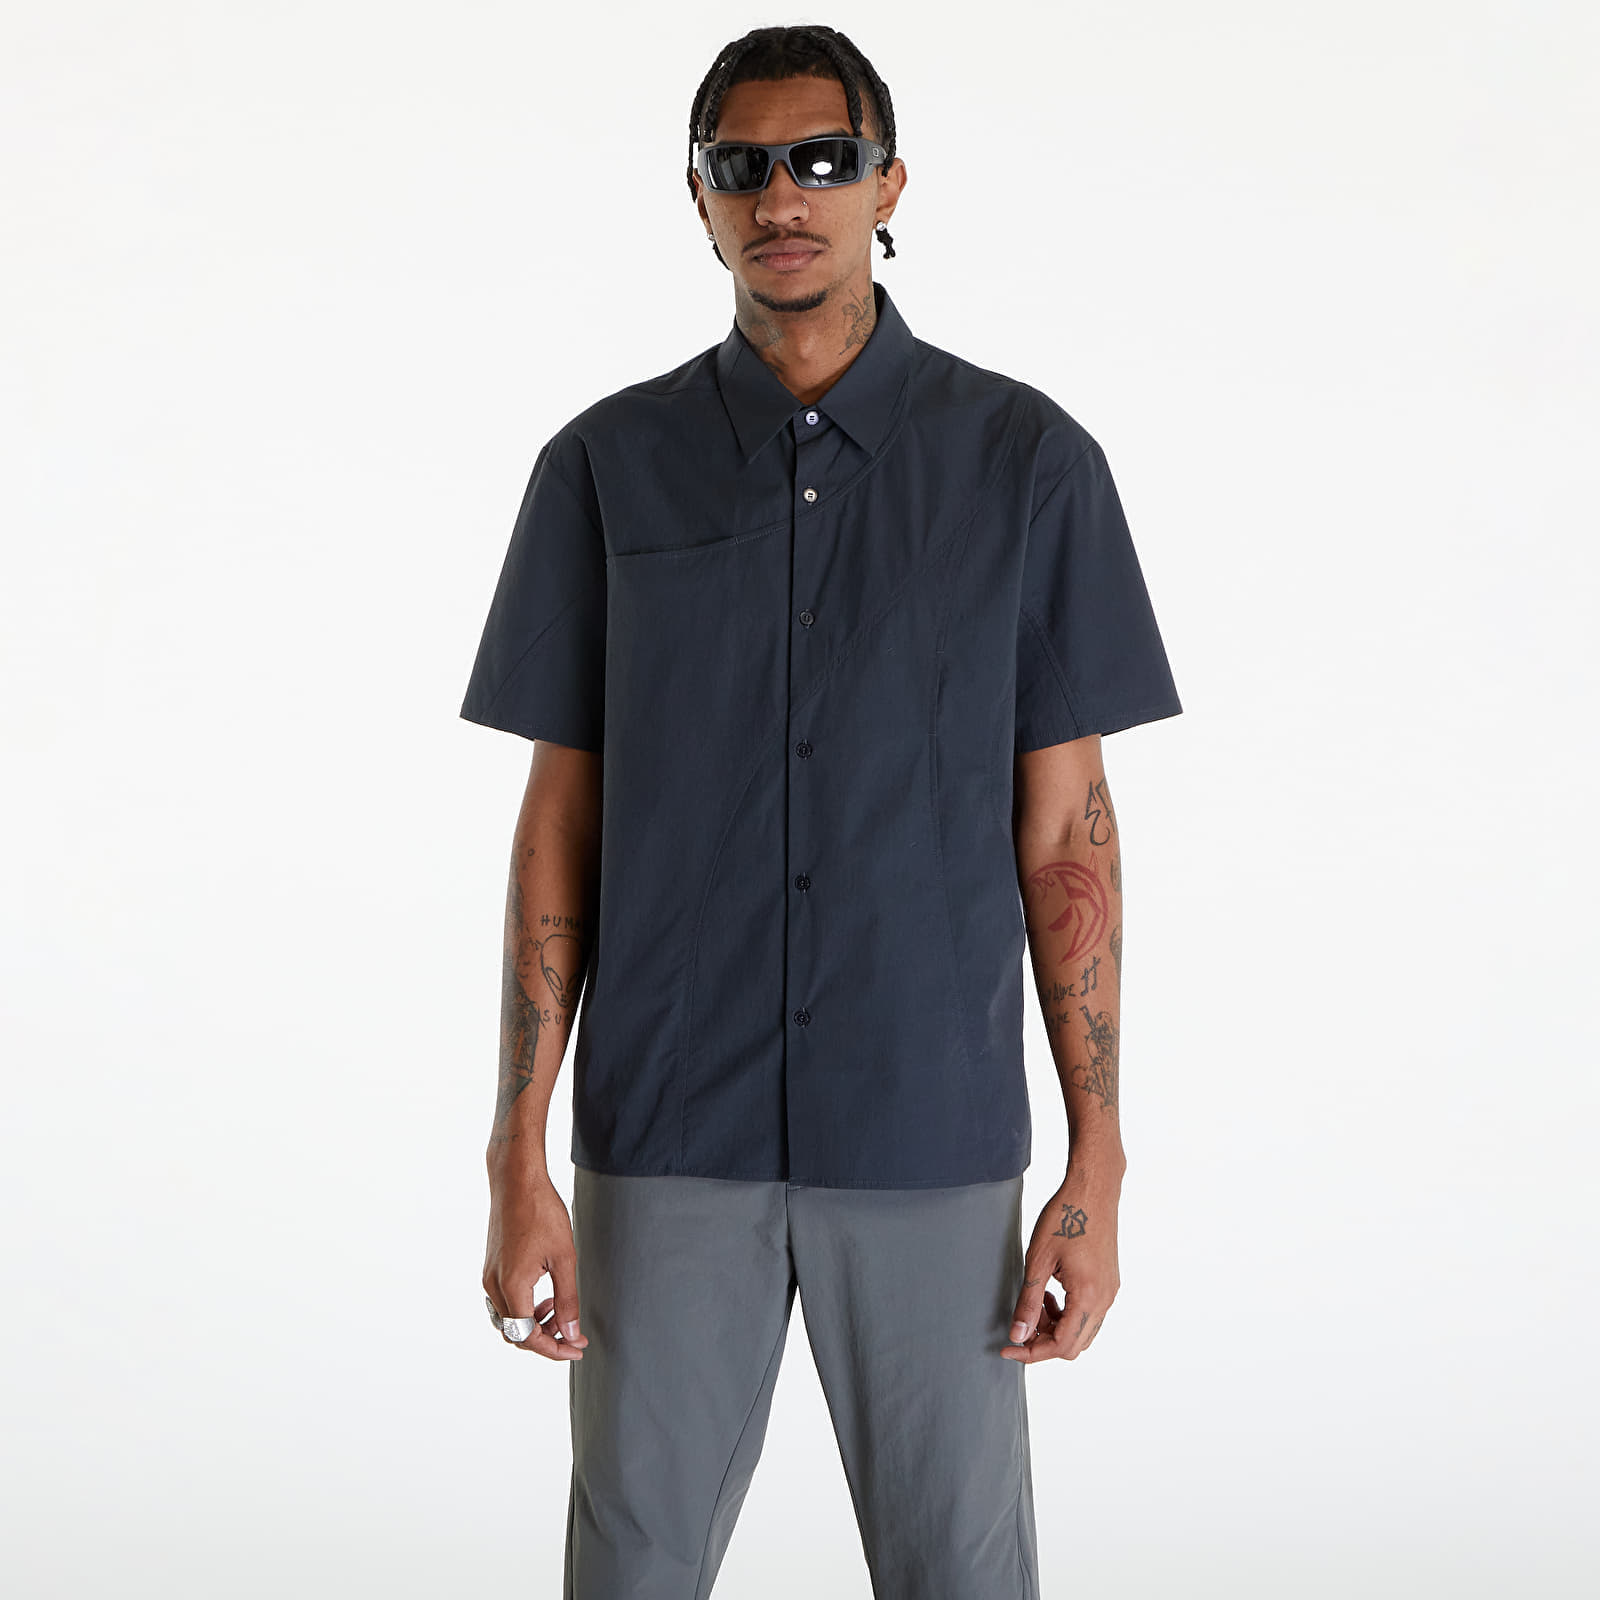 Ризи Post Archive Faction (PAF) 6.0 Shirt Center Charcoal